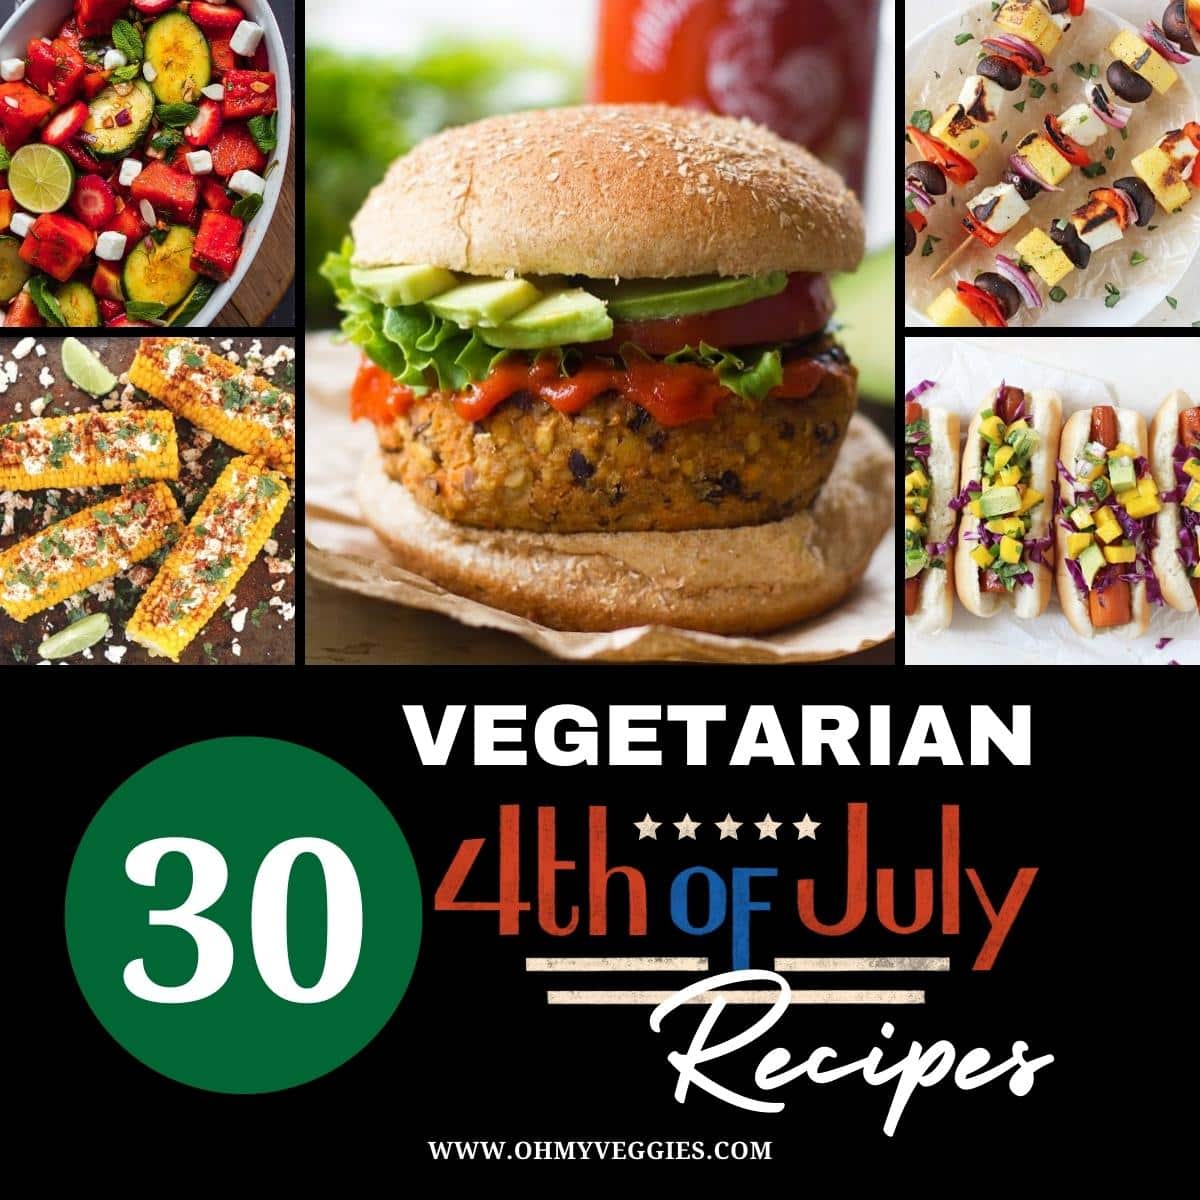 Vegetarian 4th of July Recipes